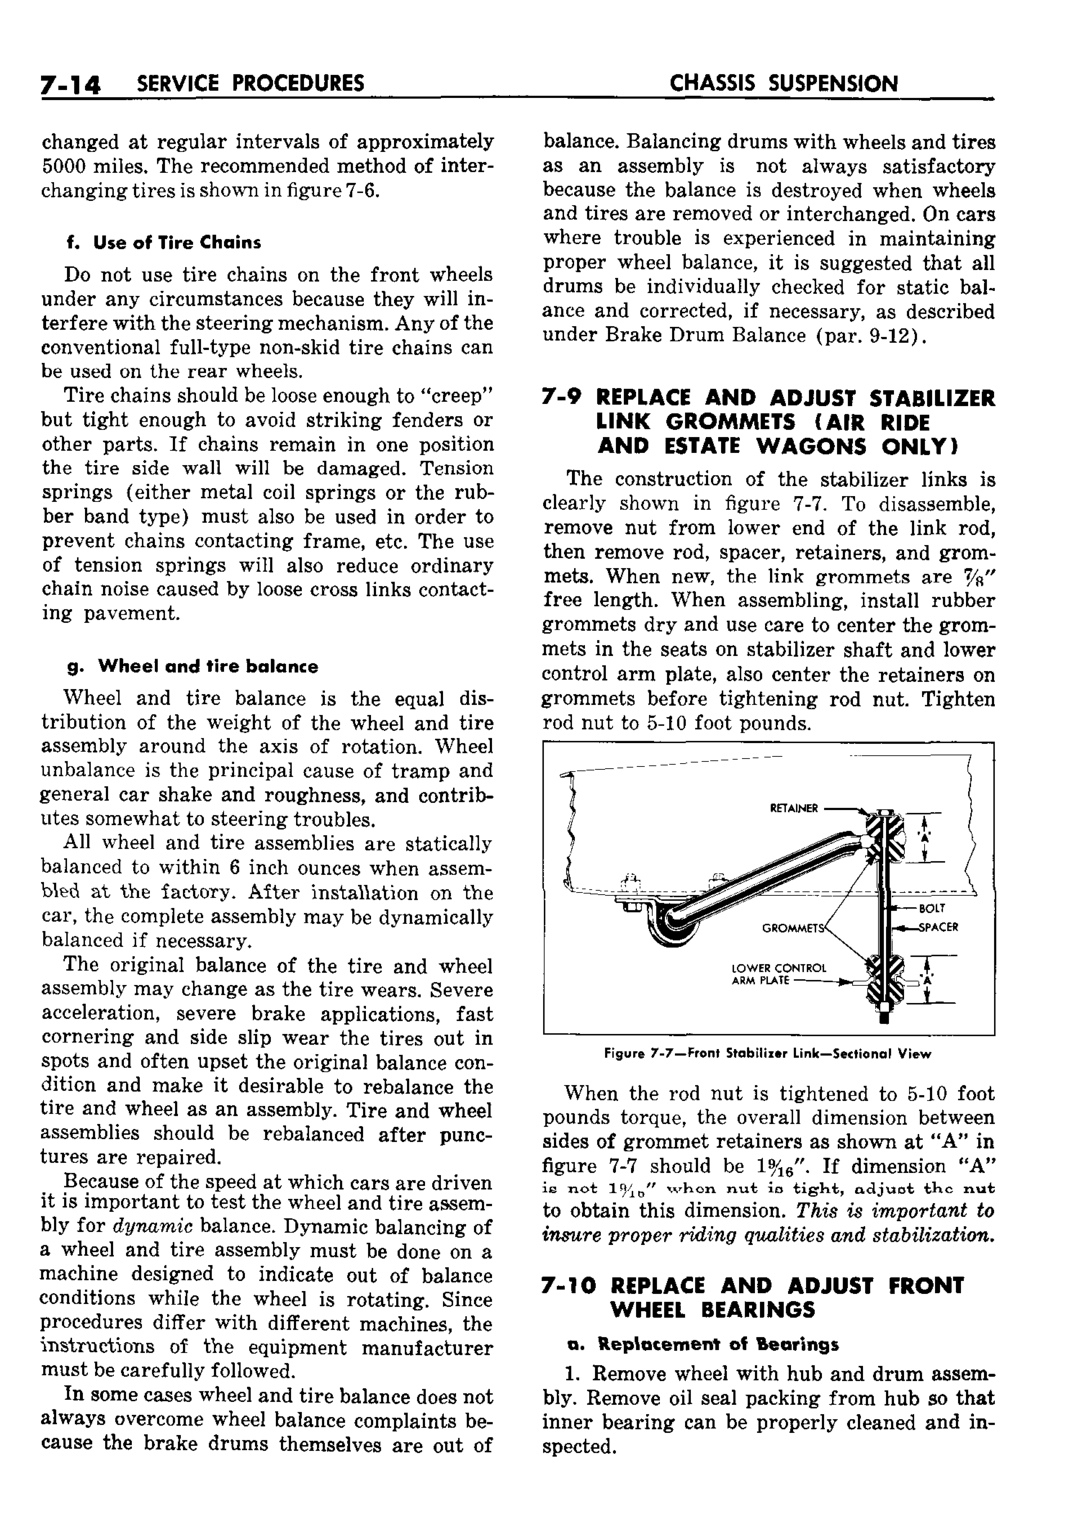 n_08 1959 Buick Shop Manual - Chassis Suspension-014-014.jpg